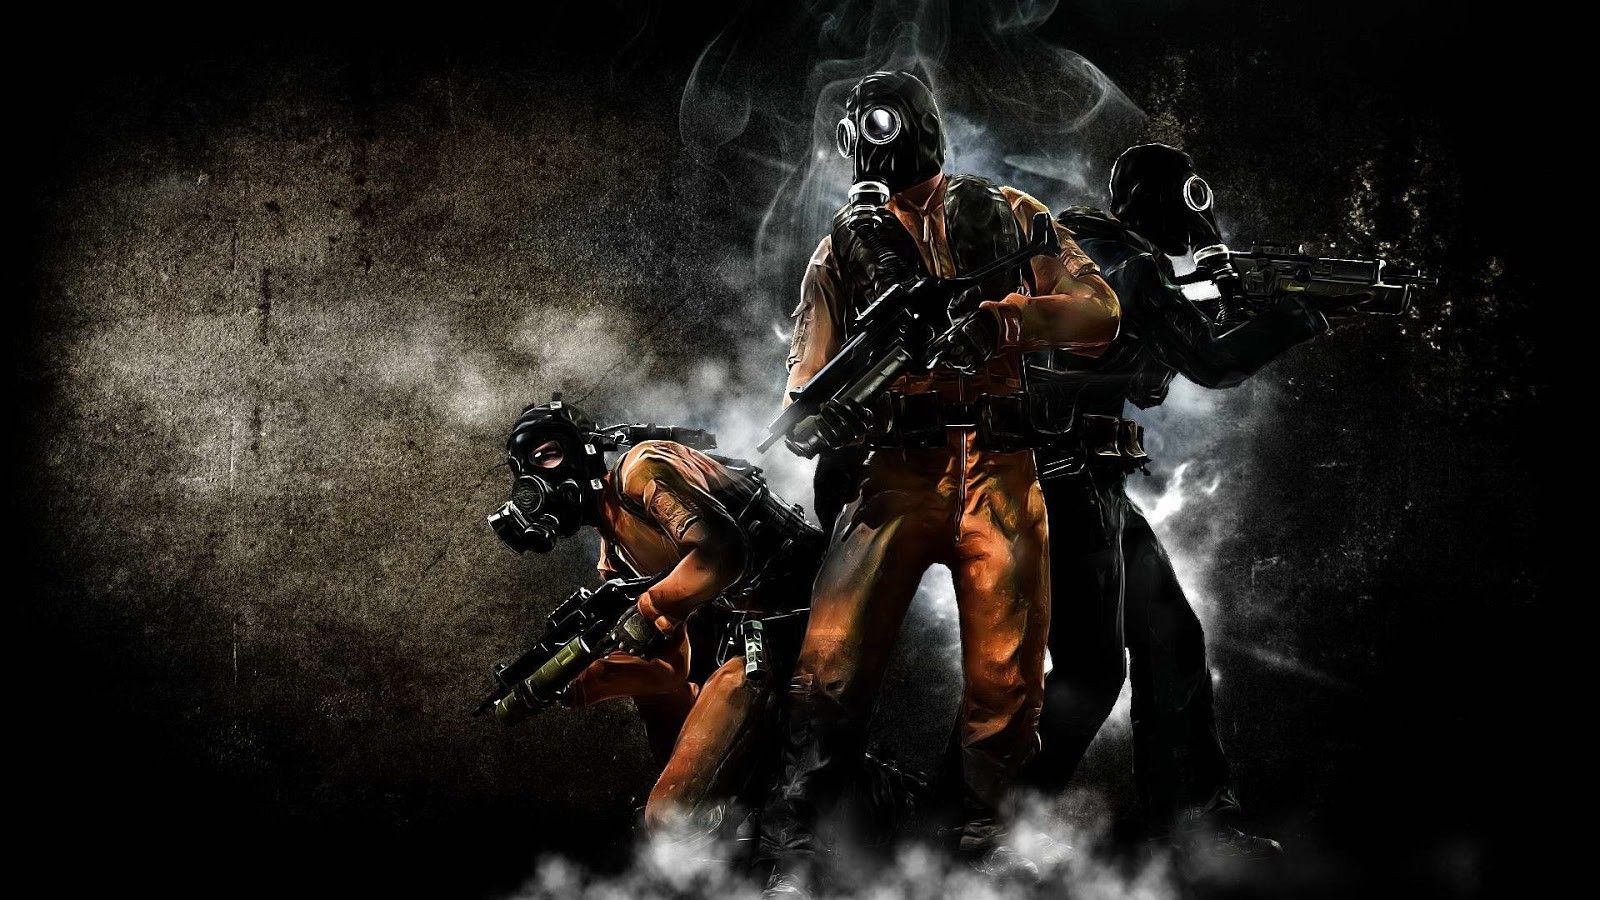 Call Of Duty Black Ops 2 Background